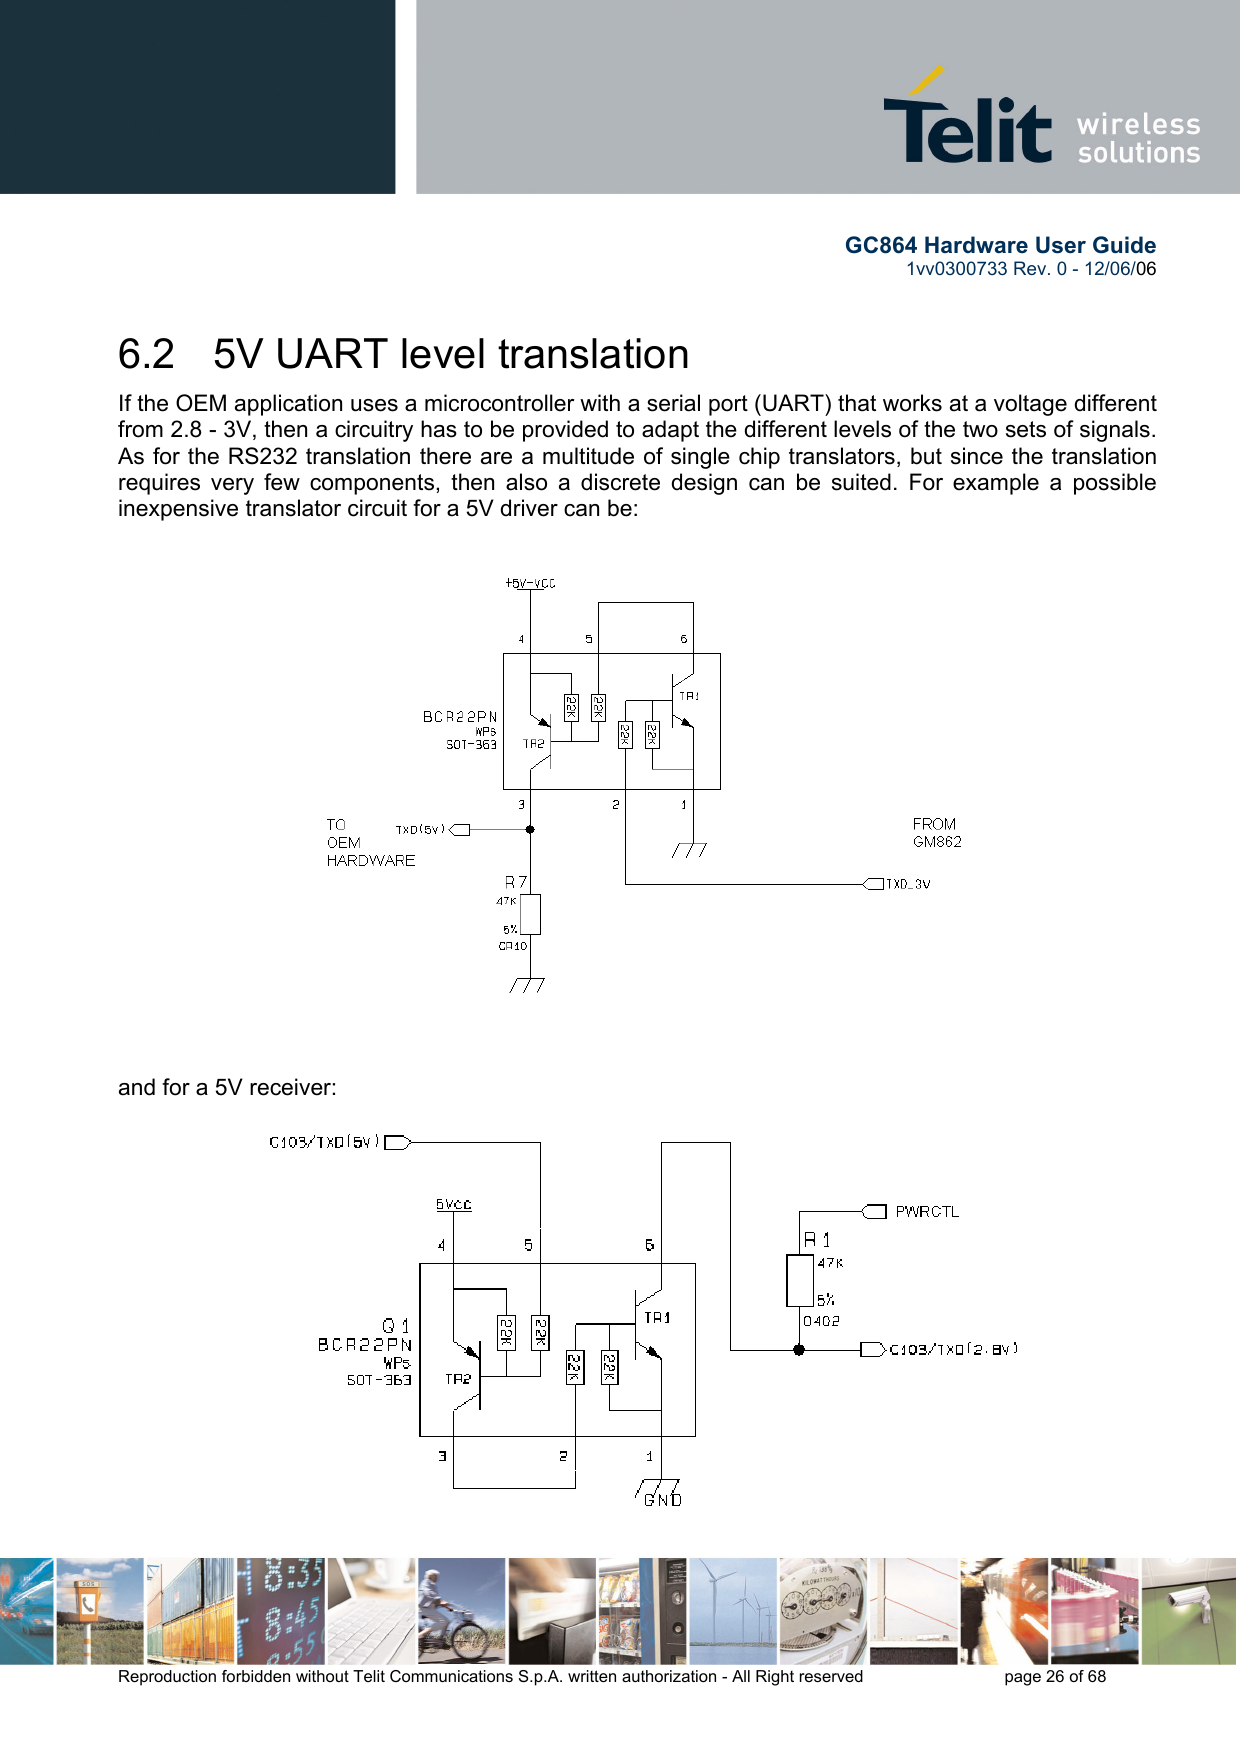        GC864 Hardware User Guide  1vv0300733 Rev. 0 - 12/06/06  Reproduction forbidden without Telit Communications S.p.A. written authorization - All Right reserved    page 26 of 68  6.2   5V UART level translation If the OEM application uses a microcontroller with a serial port (UART) that works at a voltage different from 2.8 - 3V, then a circuitry has to be provided to adapt the different levels of the two sets of signals. As for the RS232 translation there are a multitude of single chip translators, but since the translation requires very few components, then also a discrete design can be suited. For example a possible inexpensive translator circuit for a 5V driver can be:   and for a 5V receiver: 